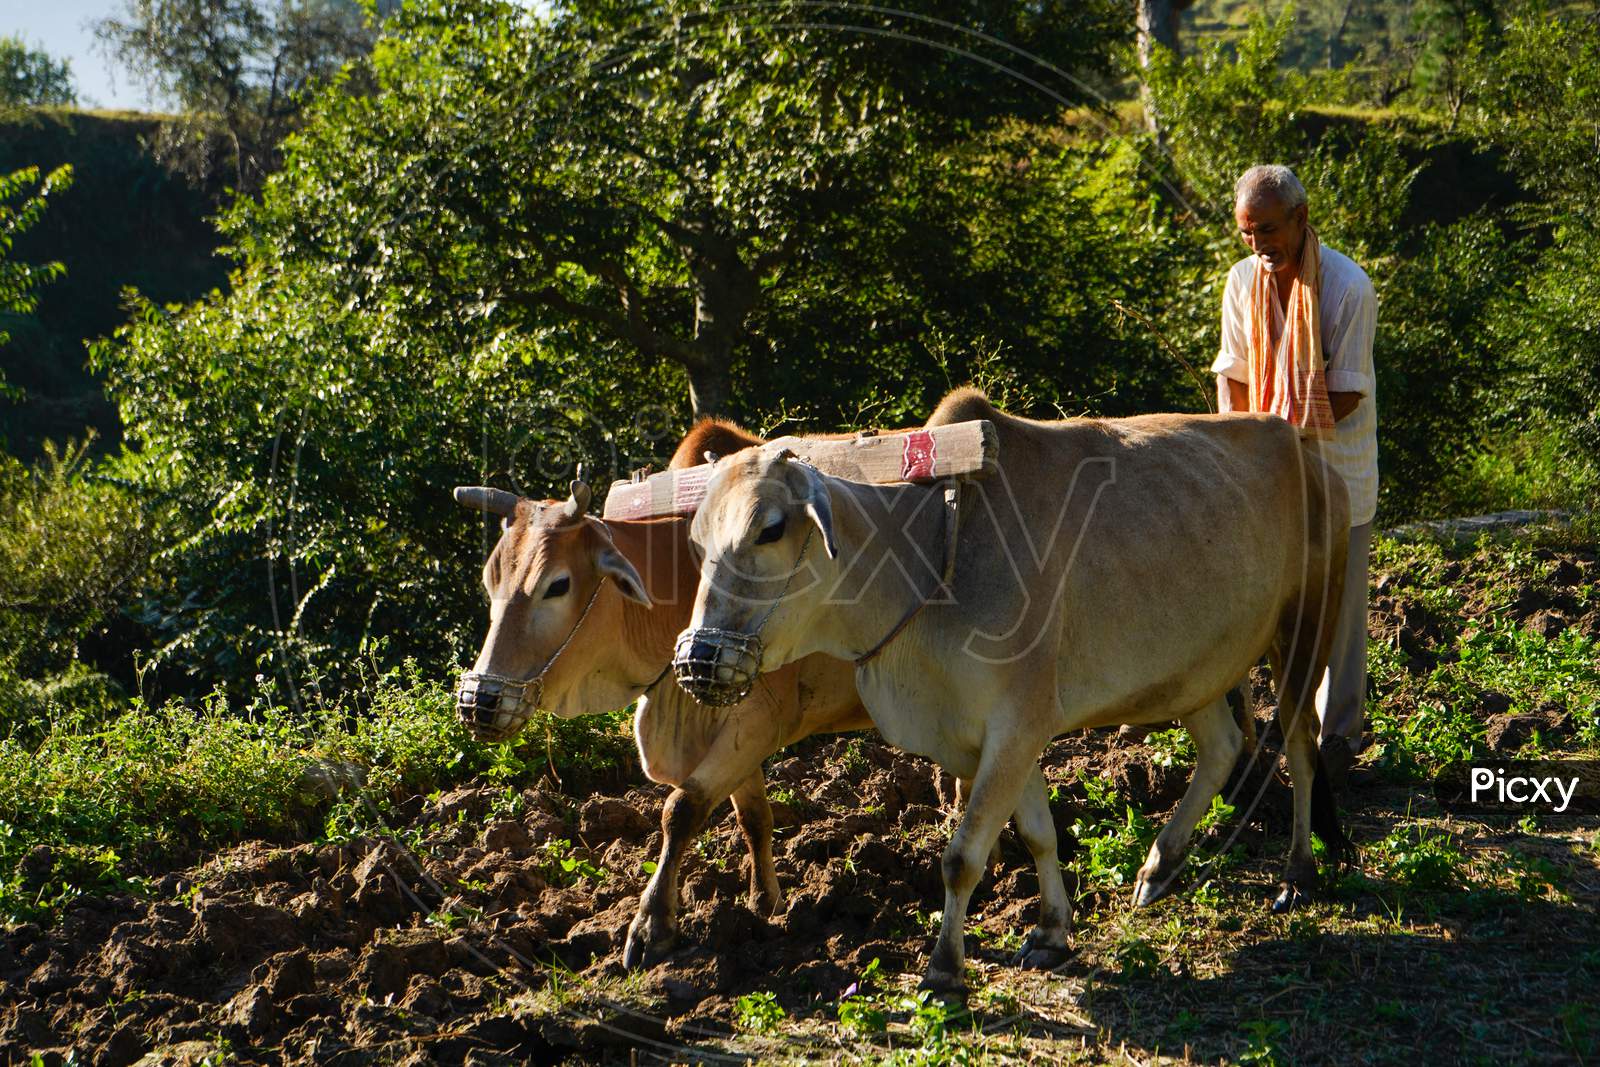 Almora,Uttarakhand, India- October 15 2021 - Indian Farmer Ploughing Rice Fields With A Pair Of Oxes Using Traditional Plough At Sunrise.Indian Farmer Working In The Fields.